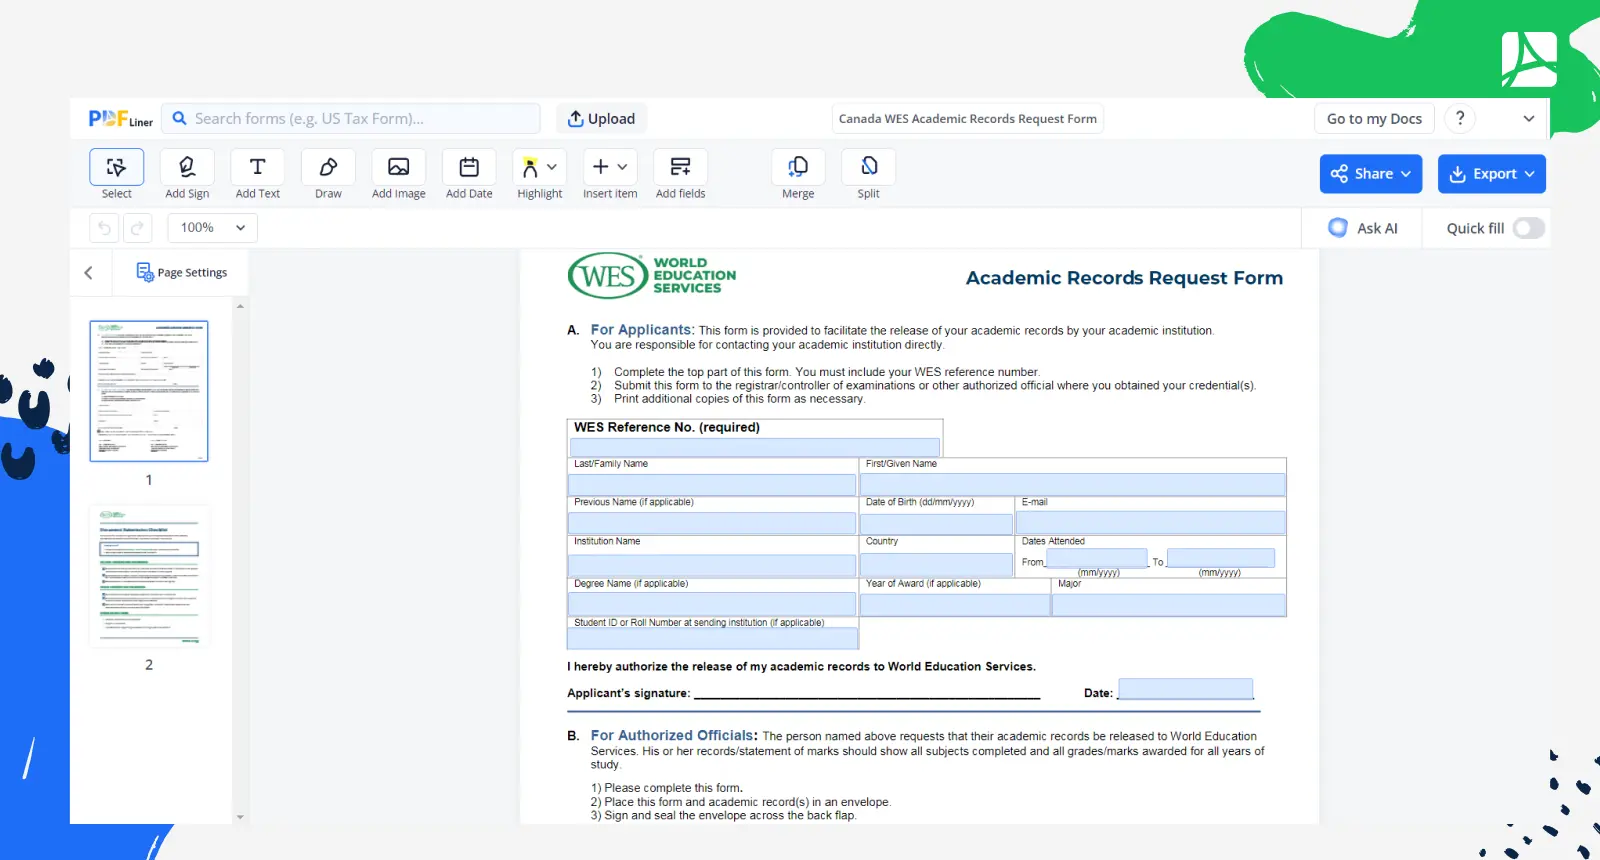 Canada WES Academic Records Request Form Template Screenshot